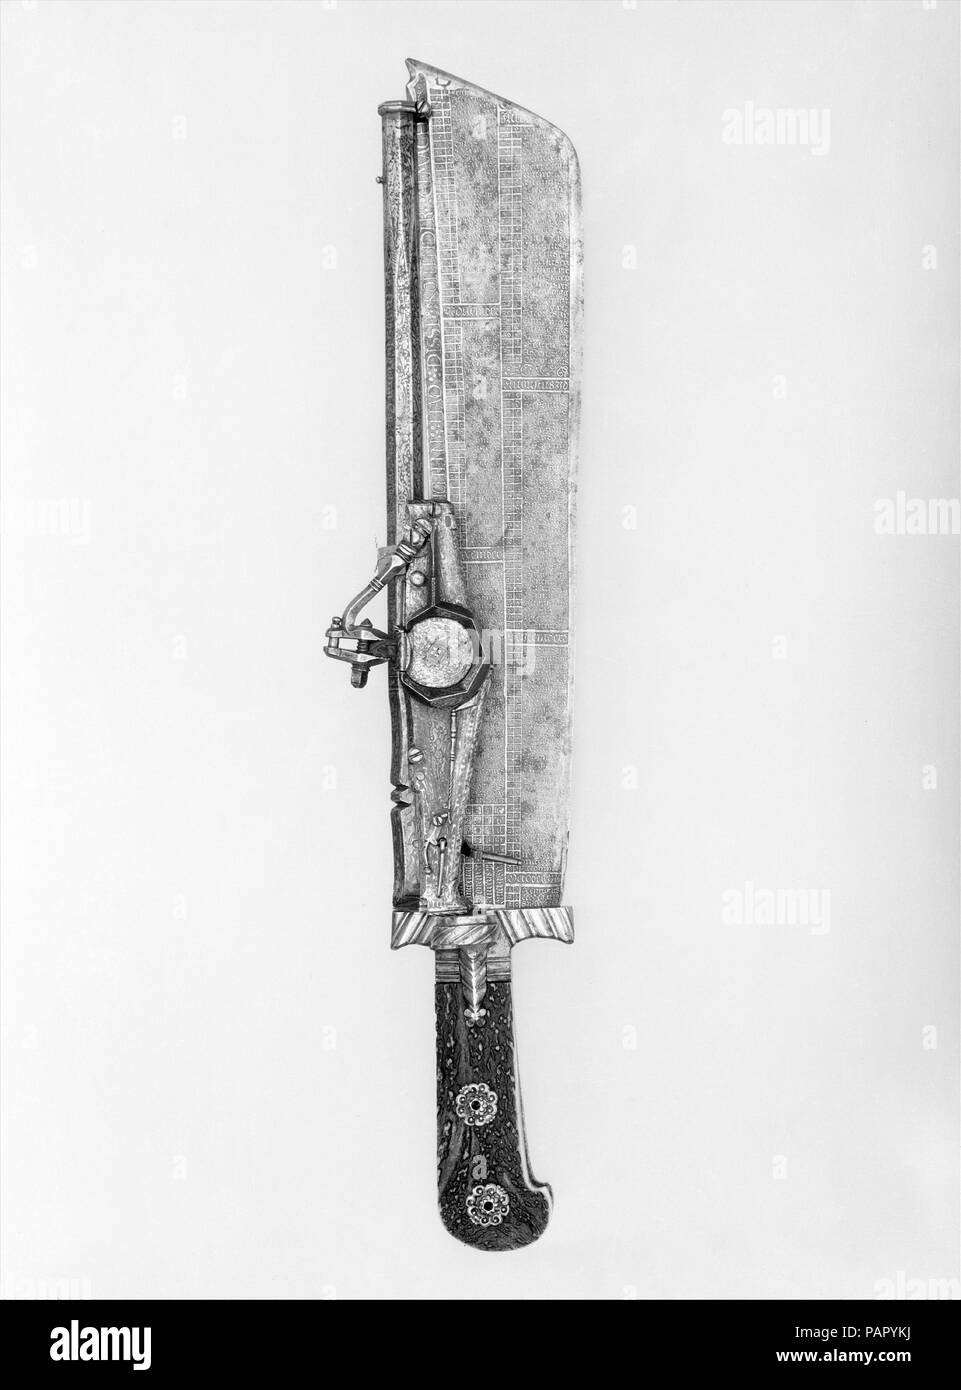 Hunting Knife Combined with Wheellock Pistol. Culture: German, Munich. Dimensions: L. 18 1/4 in. (46.4 cm); L. of barrel 12 3/8 in. (31.4 cm); L. of blade 13 1/4 in. (33.7 cm); Cal. .28 in. (7.1 mm). Etcher: Ambrosius Gemlich (German, Munich and Landshut, active ca. 1520-50). Date: blade ca. 1528-29, etched with a calendar for the years 1529-34; barrel dated 1540 or 1546.  In the sixteenth century, wheellock pistols sometimes were combined with swords, knives, axes, maces, spears, and even crossbows, which could be used in the event the pistol misfired. Usually clumsy and impractical, combined Stock Photo